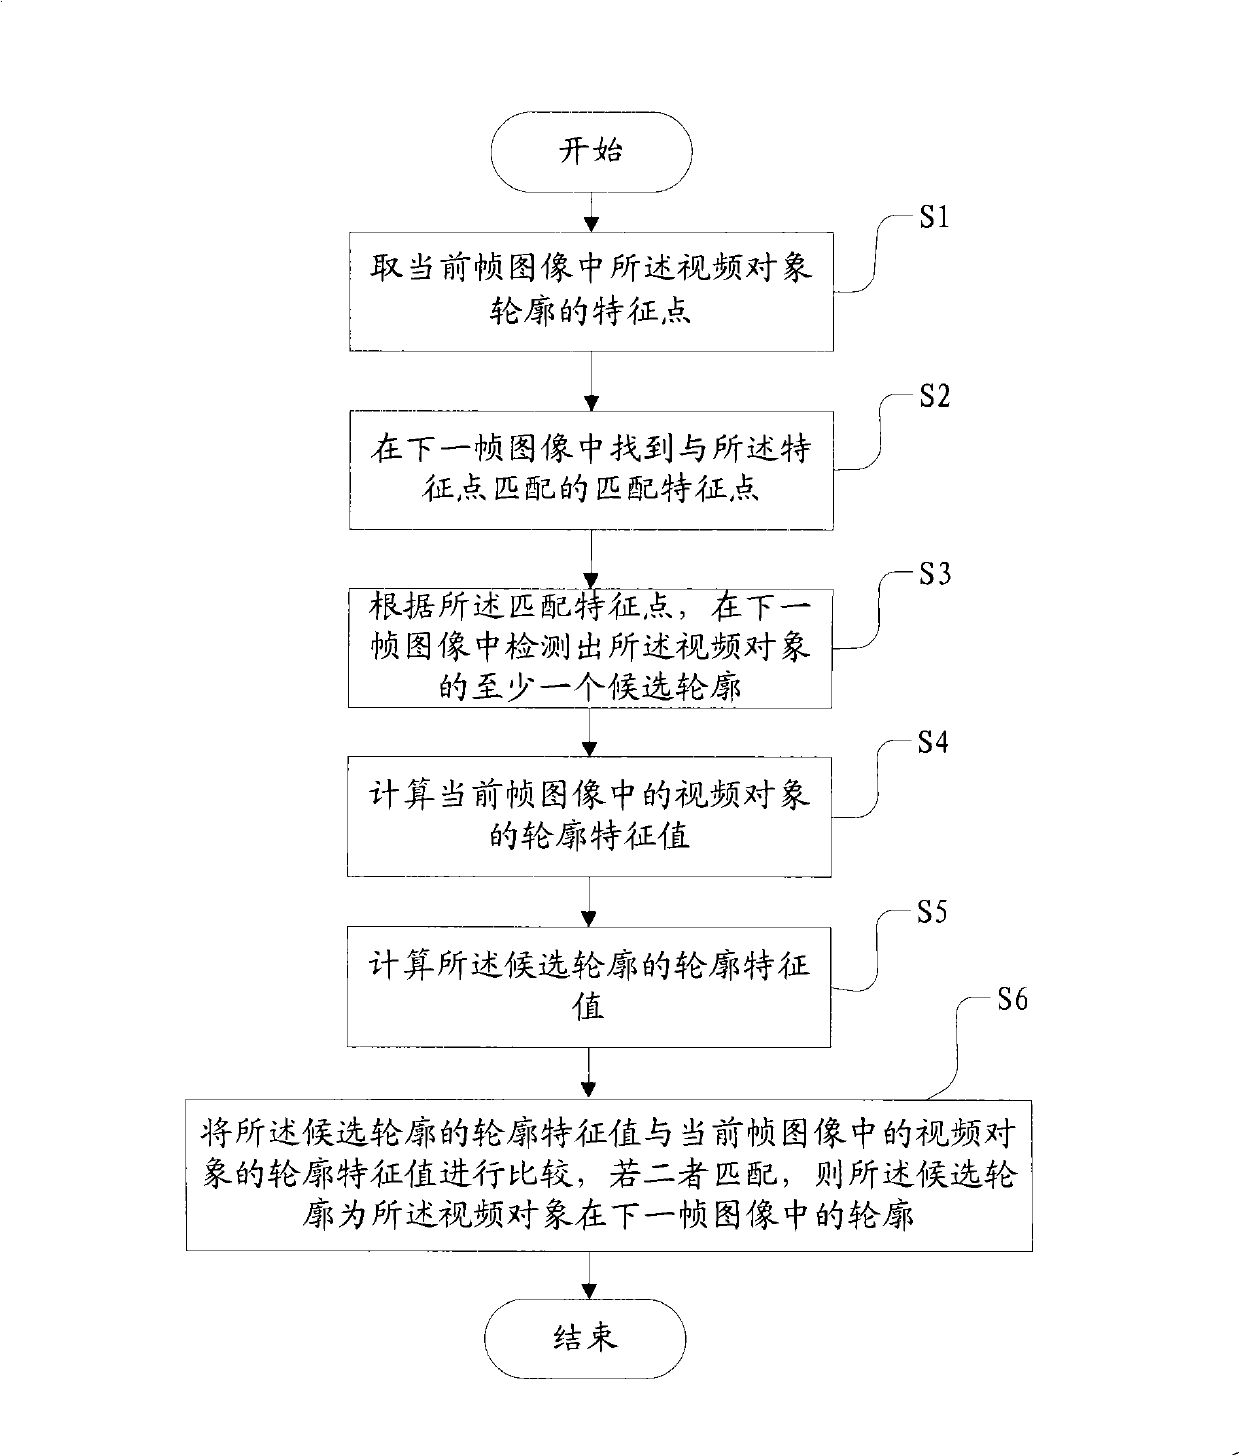 Method and apparatus for tracking video object